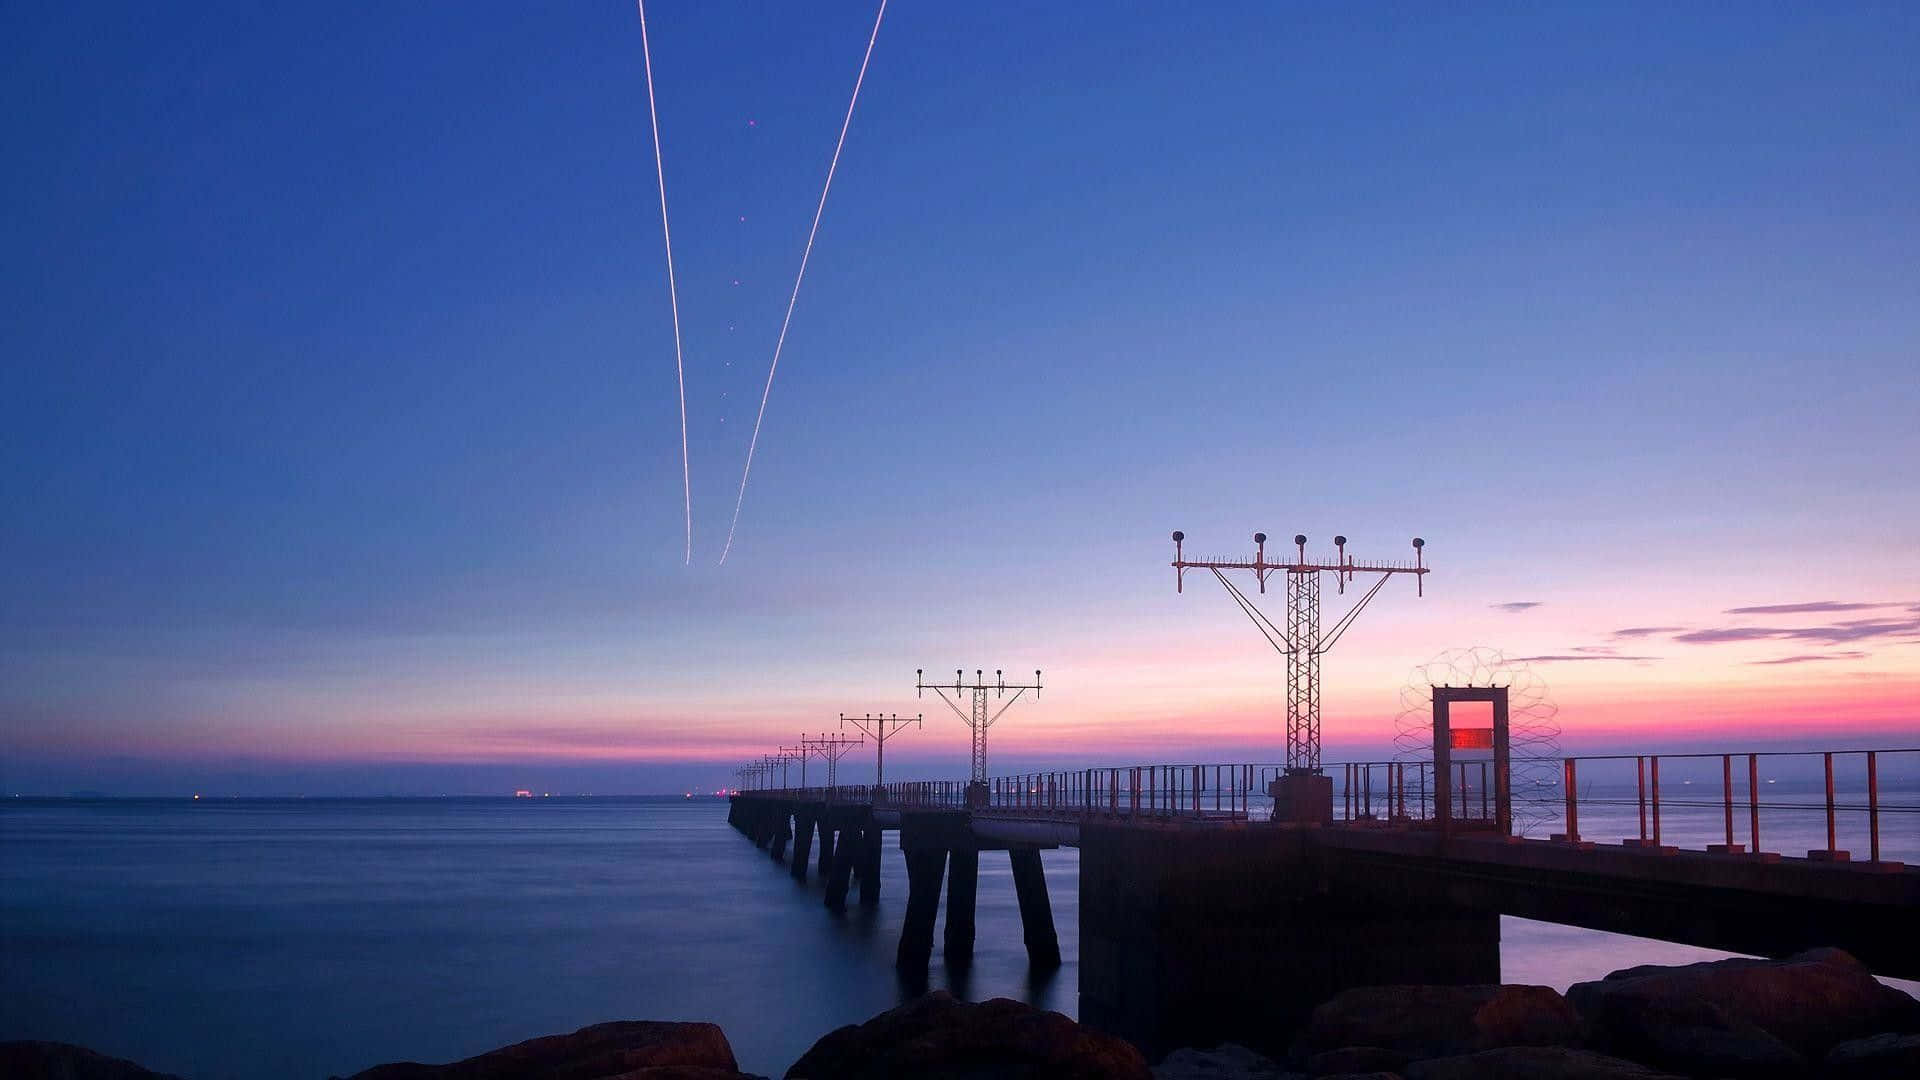 A Plane Flying Over A Pier At Sunset Wallpaper